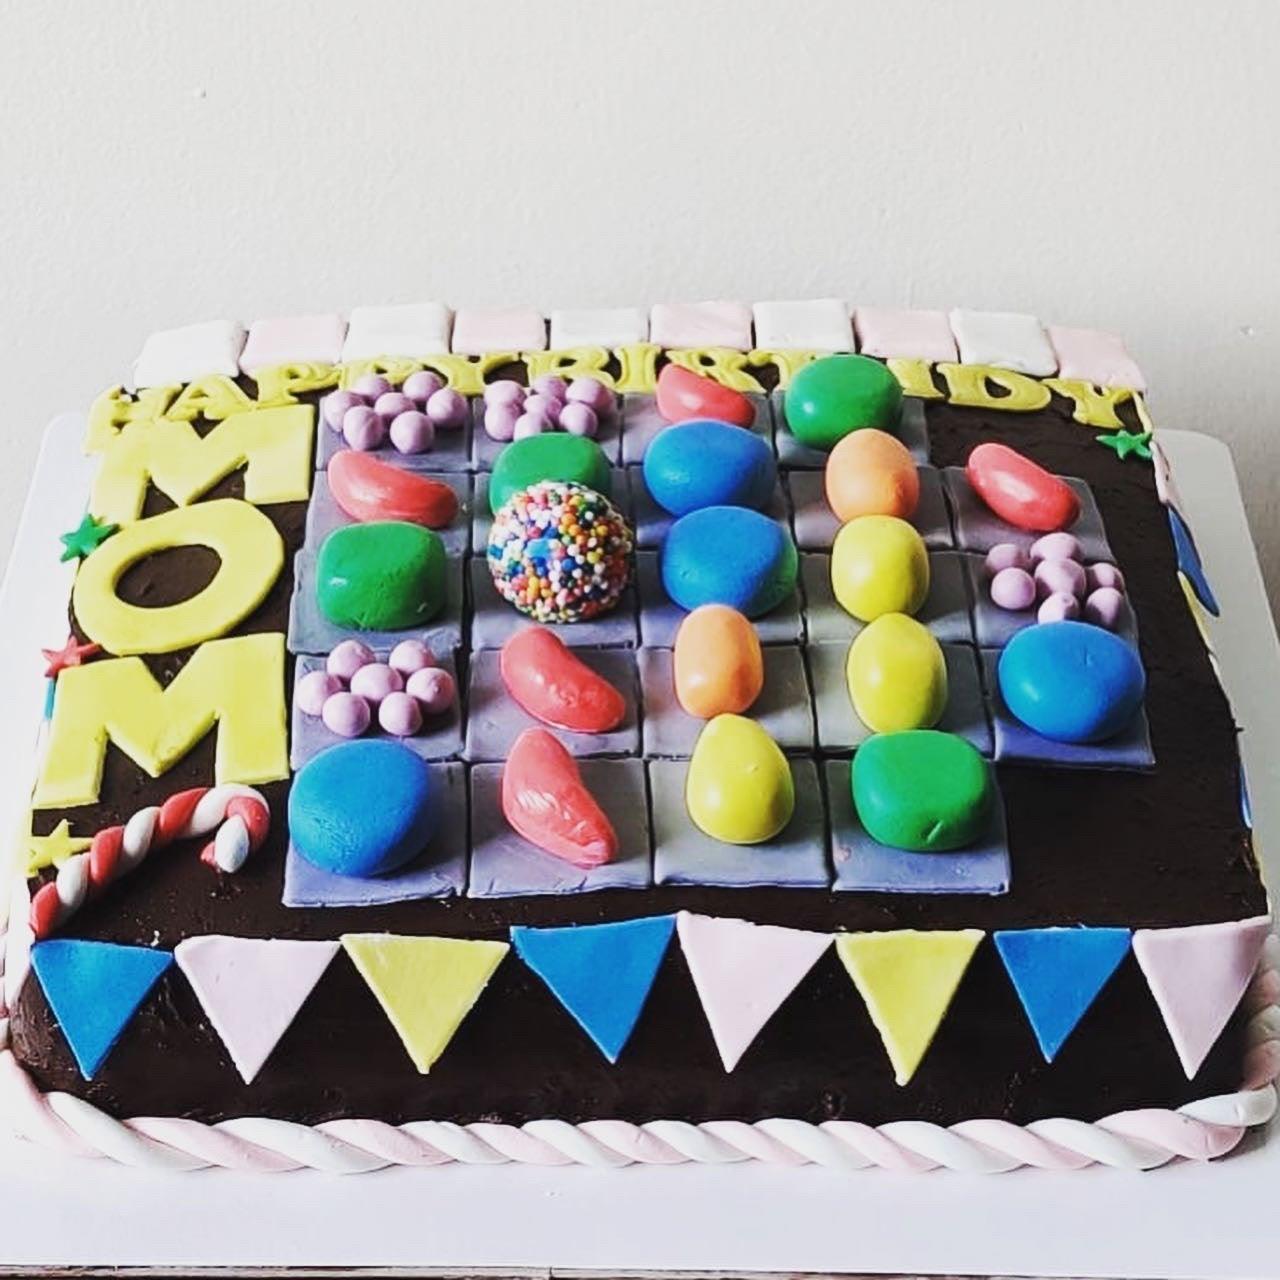 Top 15 Mouthwatering Candy Cakes Ever Designed - Page 12 of 15